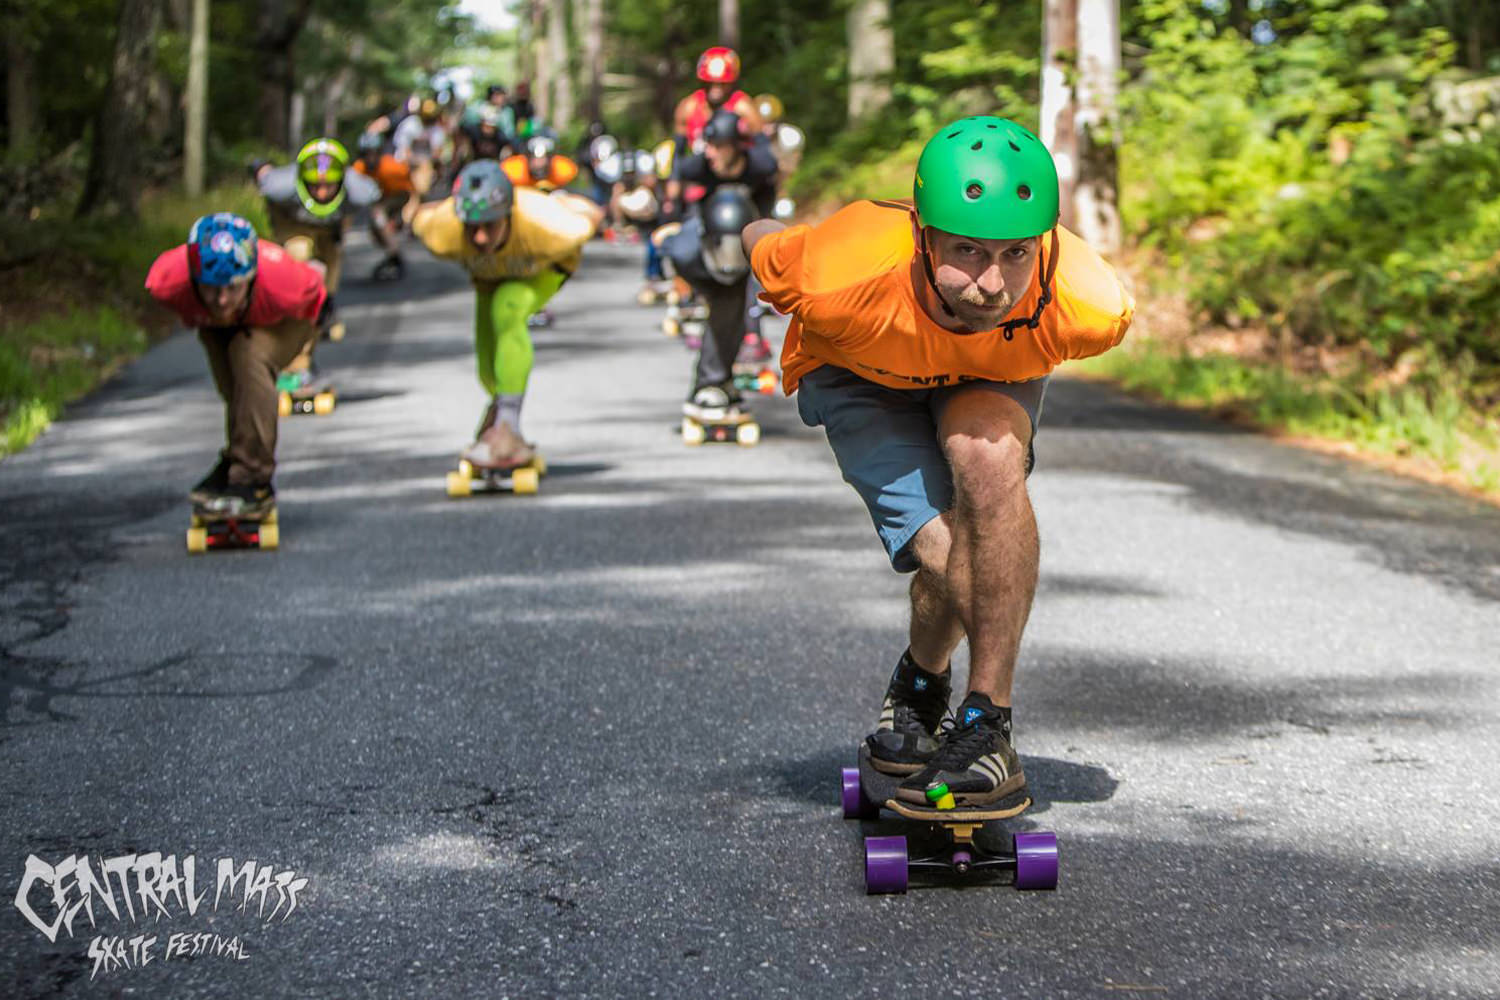 stoked-ride-shop-central-mass-skate-festival